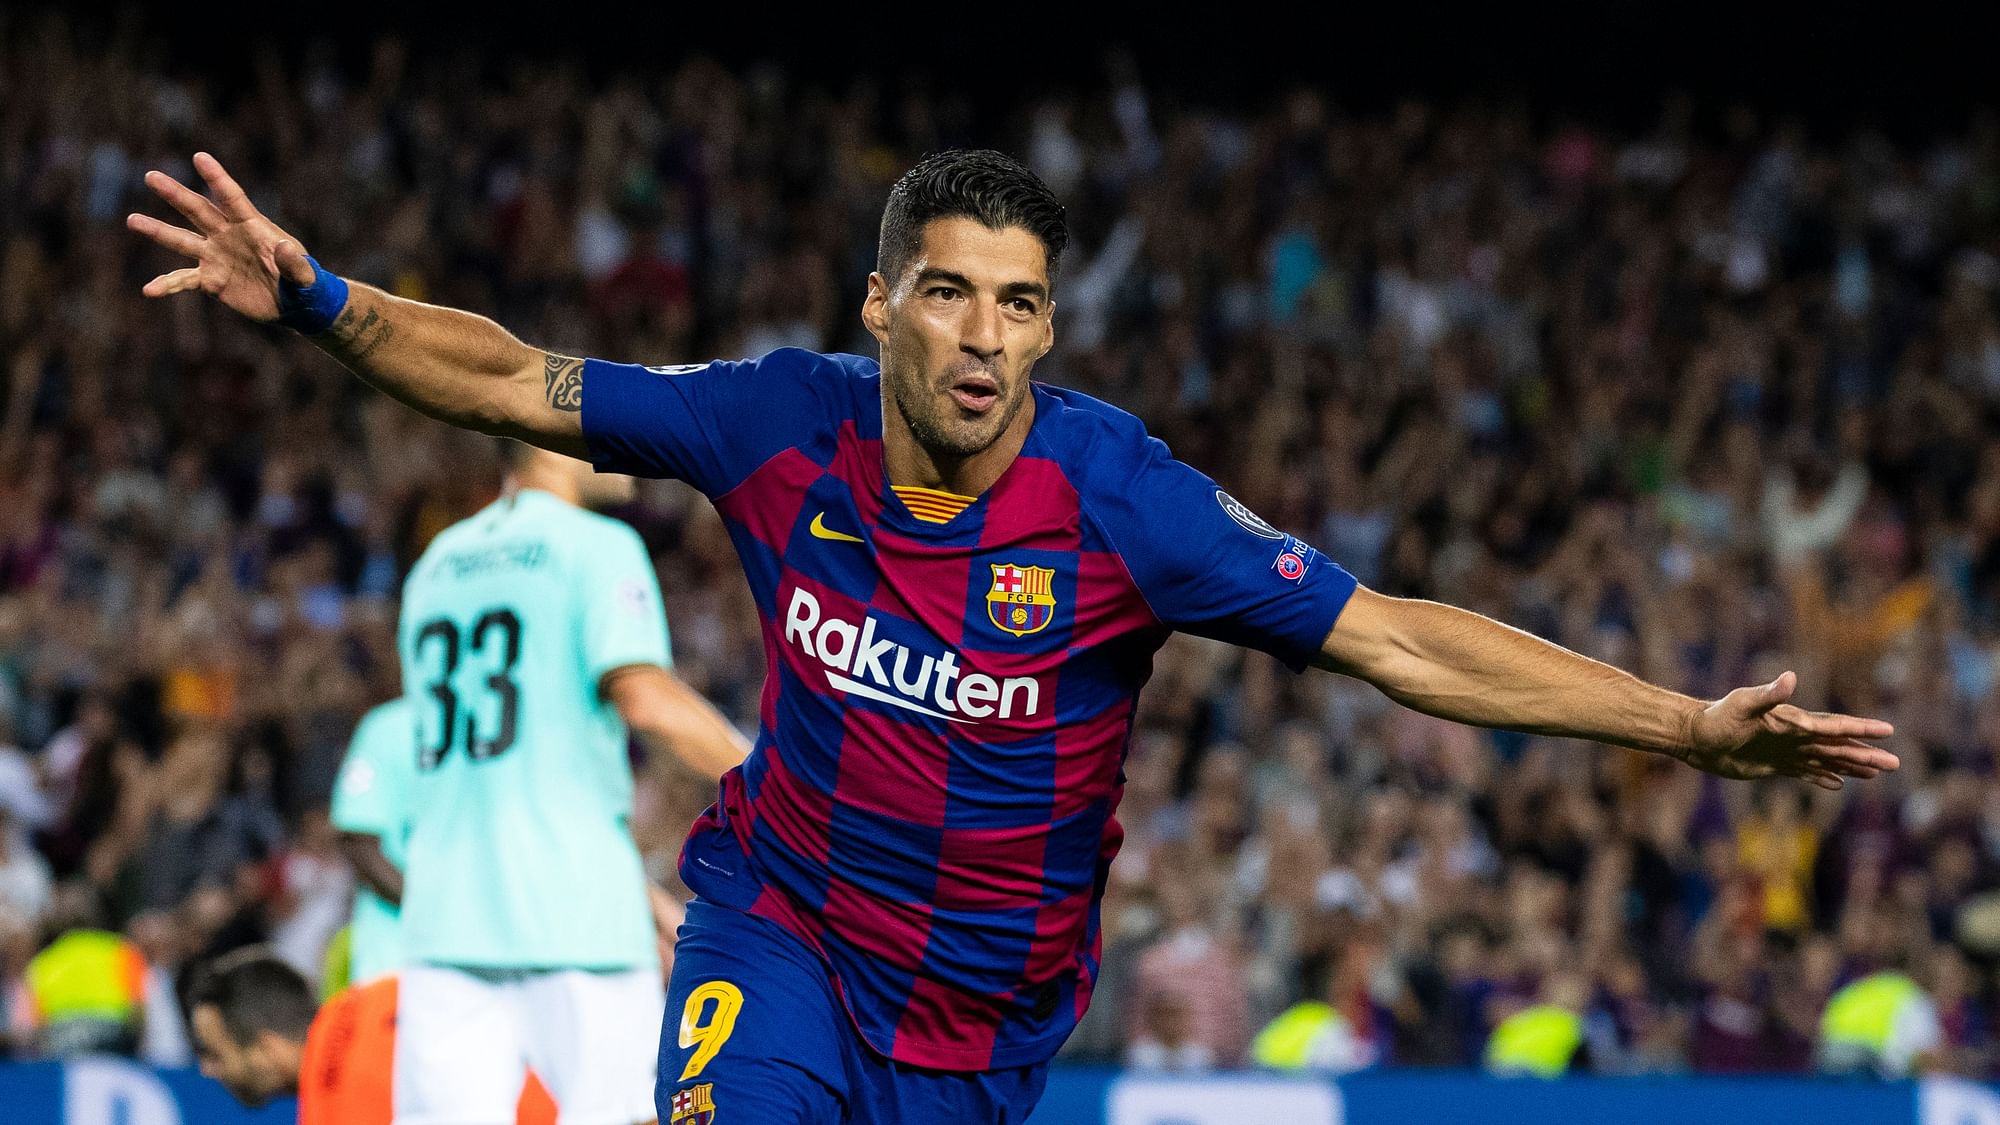 Barcelona forward Luis Suarez has conceded the LaLiga title race to Clasico rivals Real Madrid.